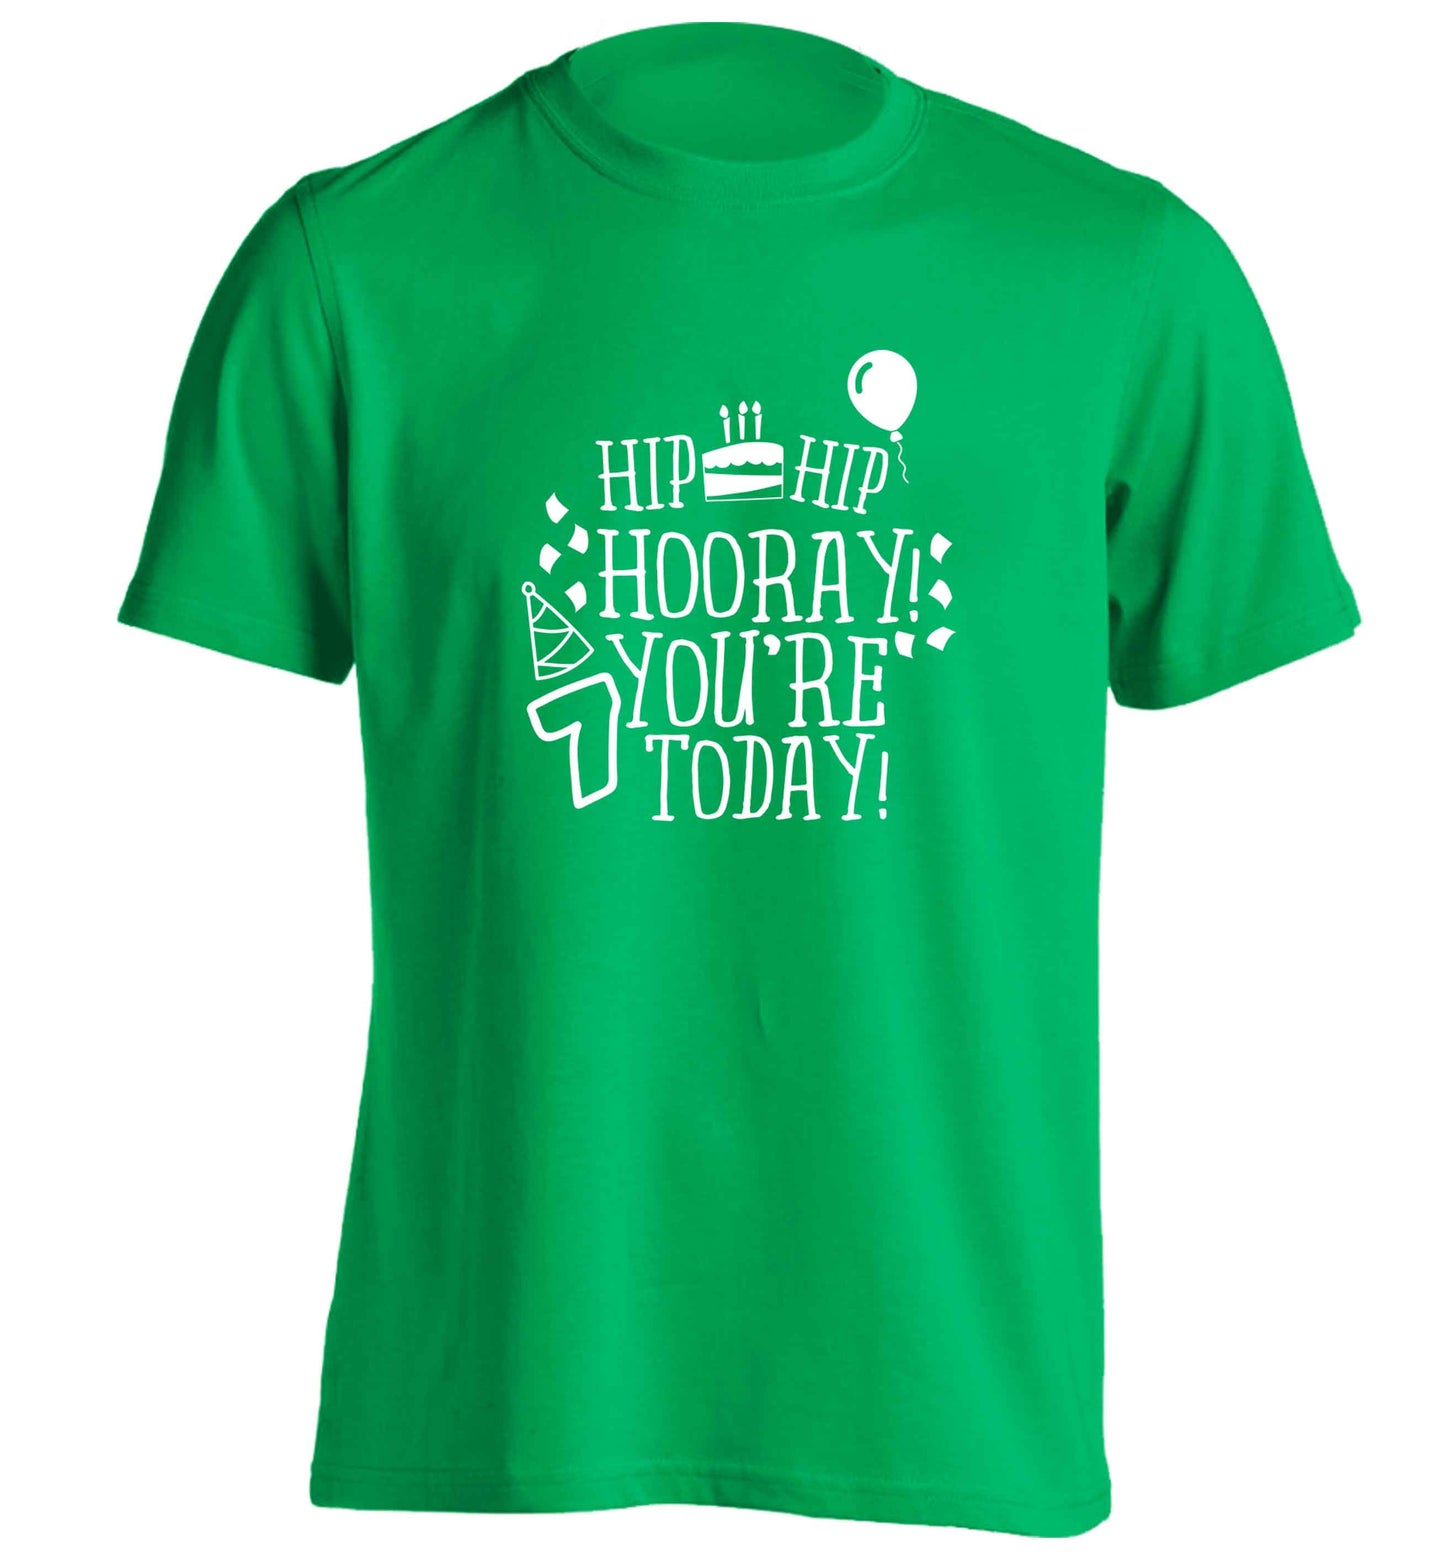 Hip hip hooray you're seven today! adults unisex green Tshirt 2XL